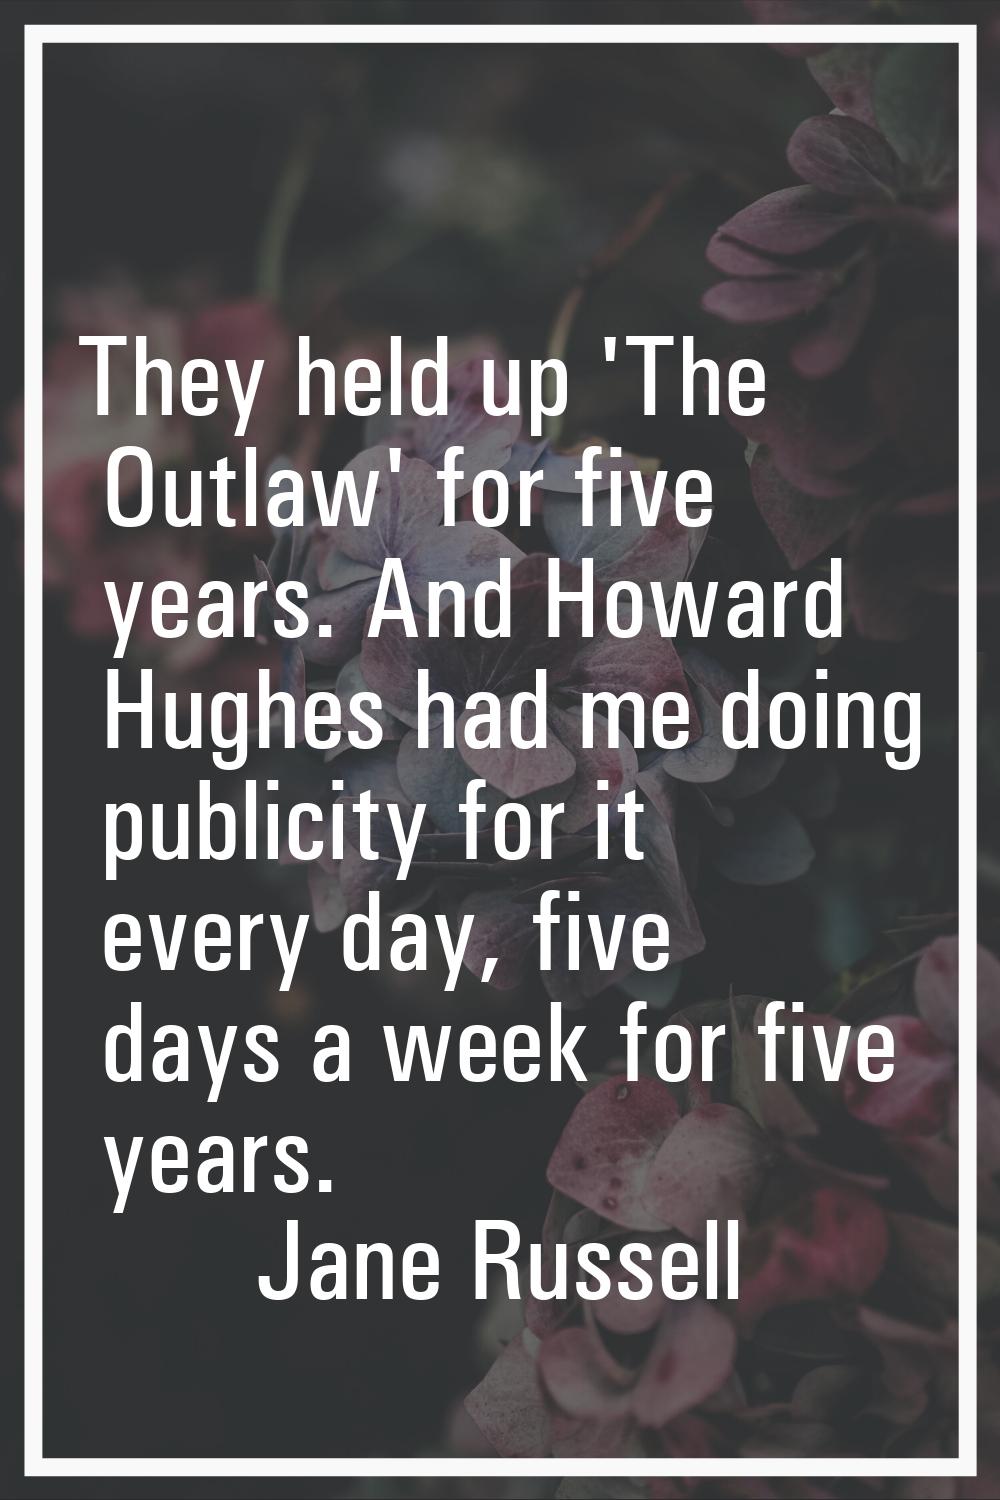 They held up 'The Outlaw' for five years. And Howard Hughes had me doing publicity for it every day